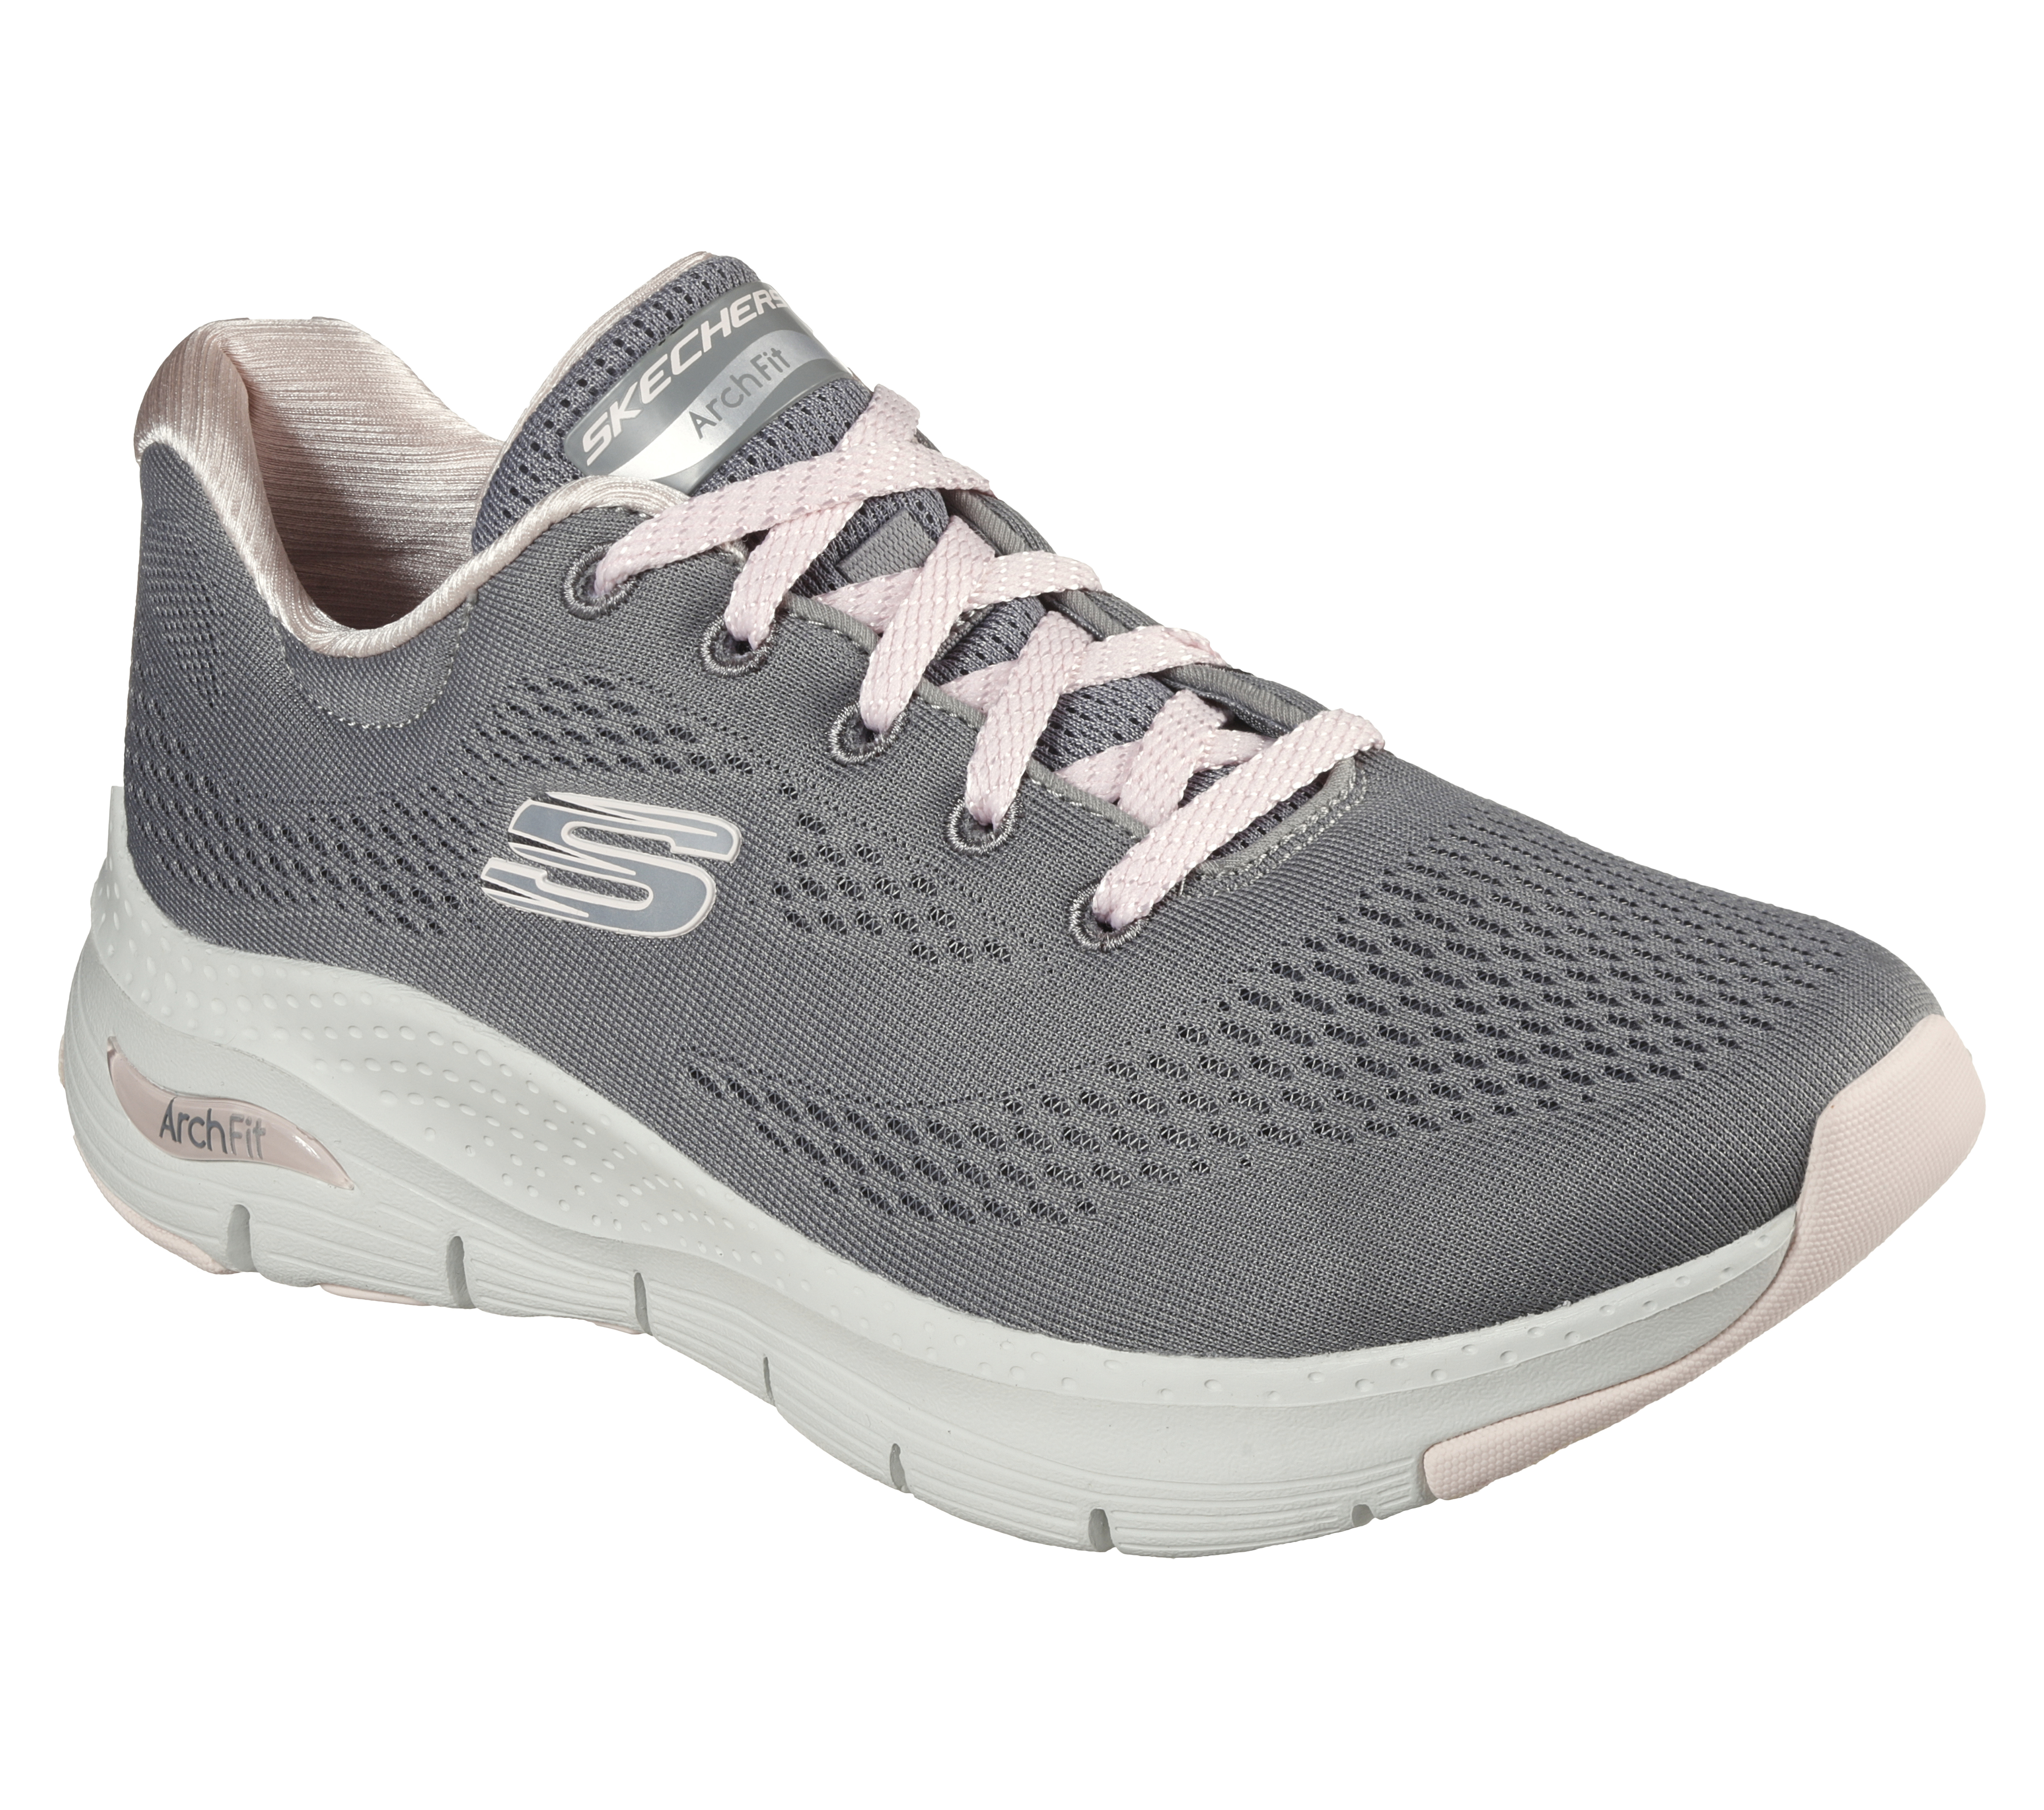 Shop the Skechers Arch Fit - Big Appeal 